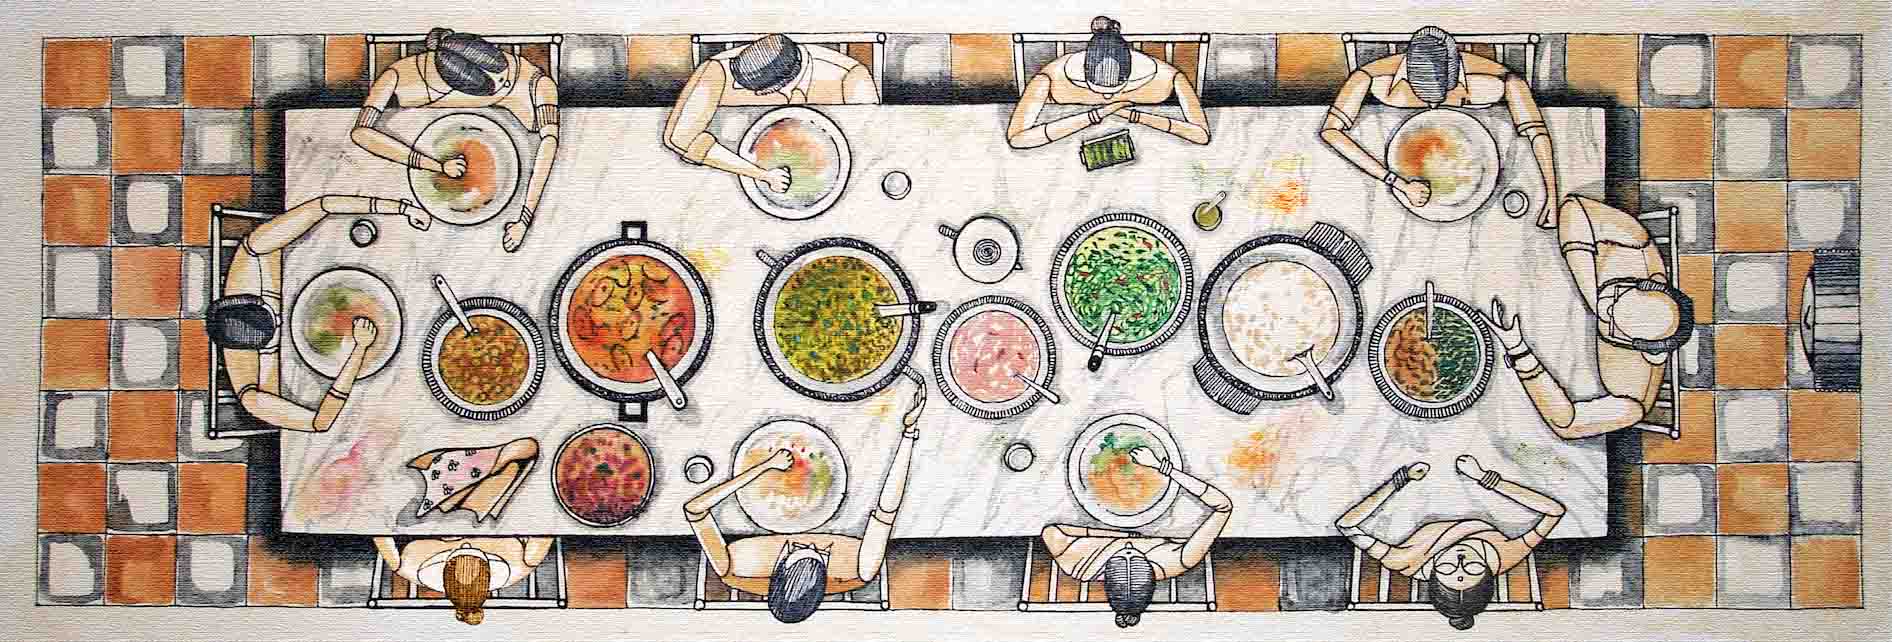 A drawing of a group of people sitting at a table with food.